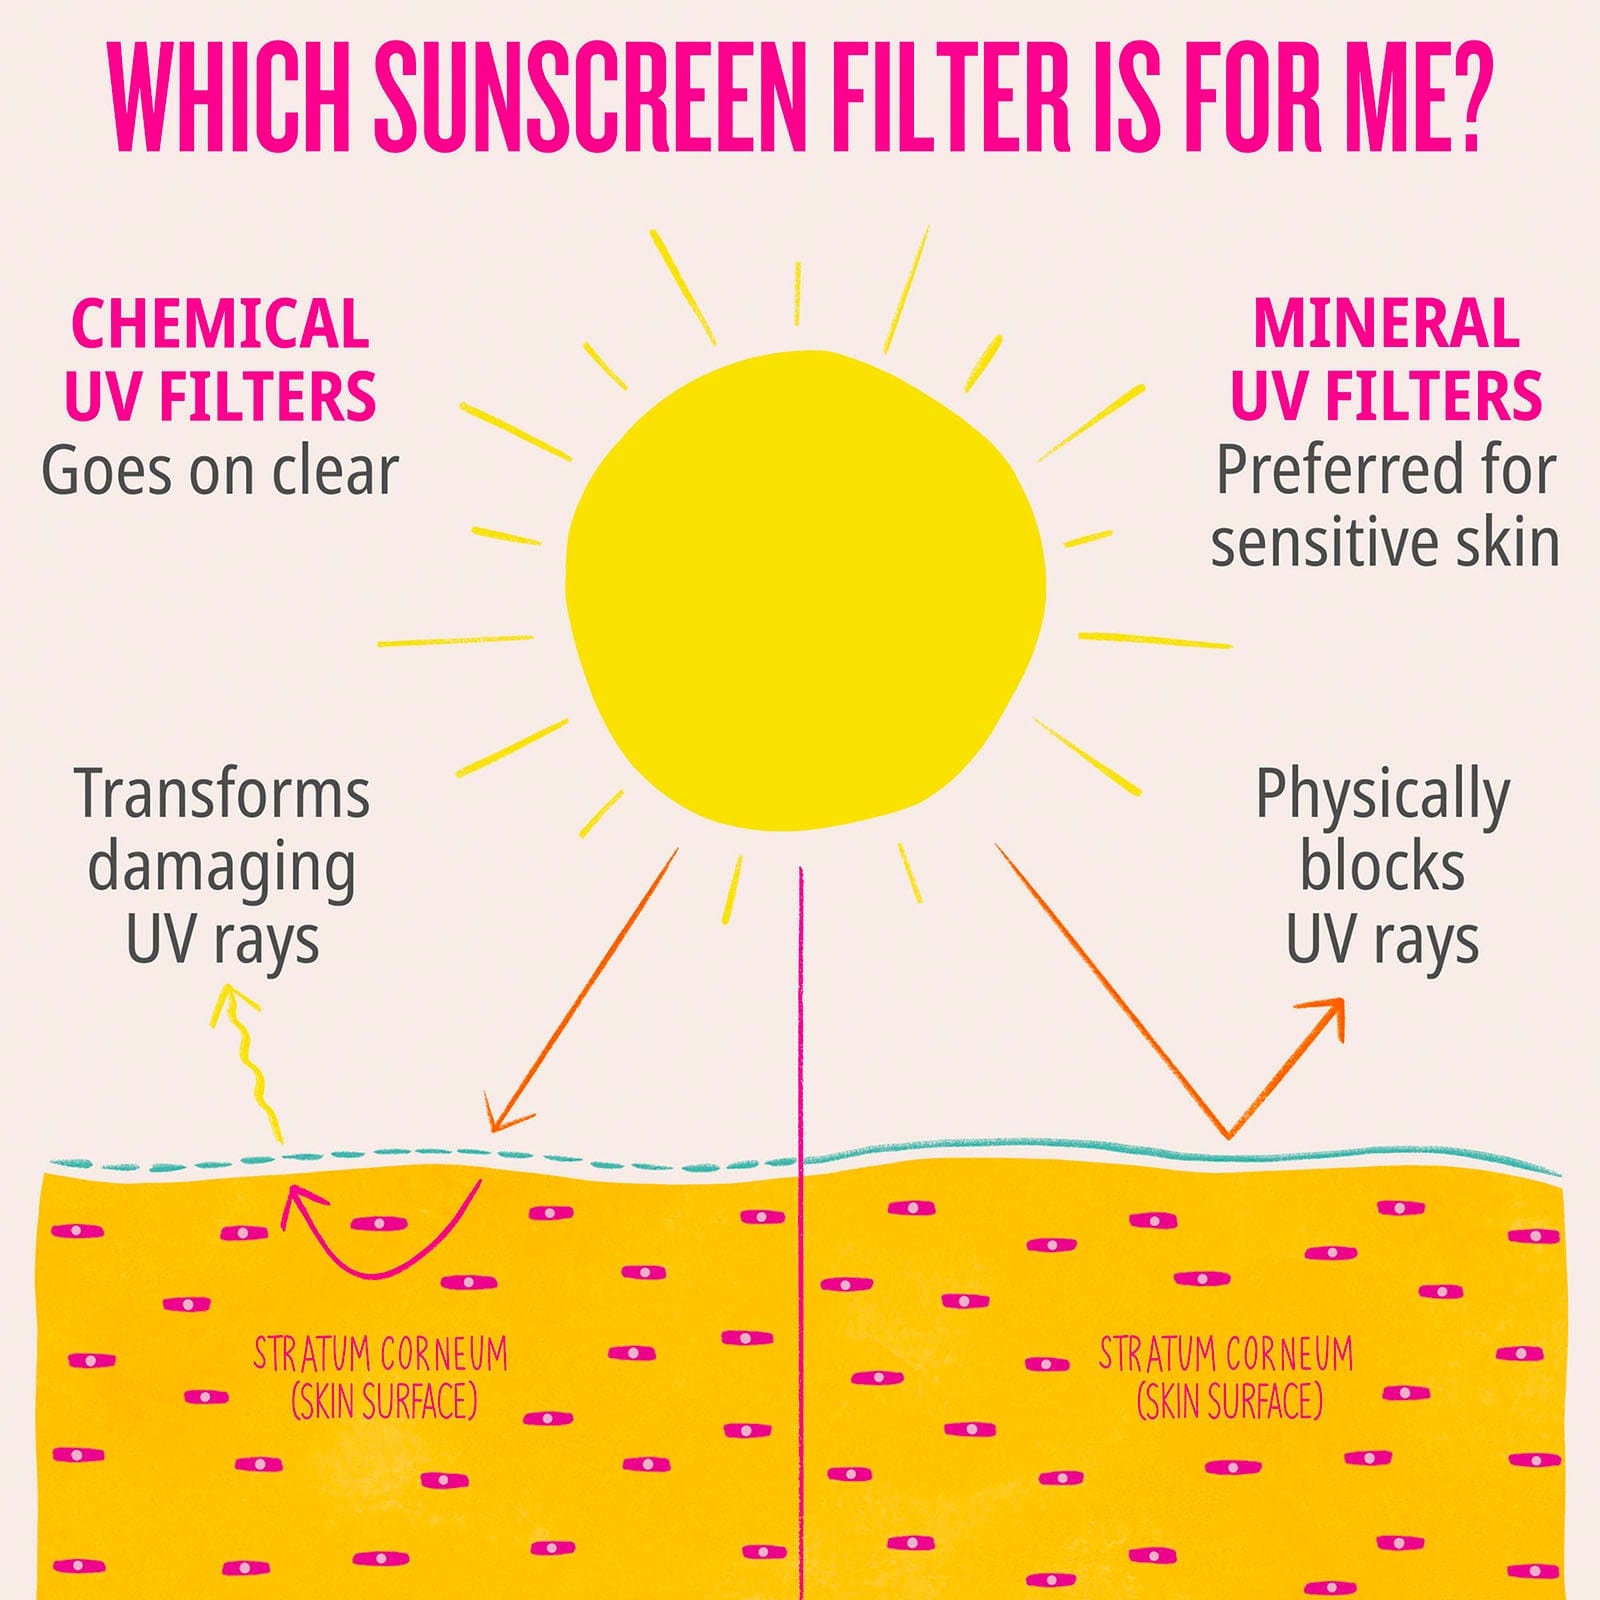 Which sunscreen filter is for me? Chemical UV filters goes on clear VS Mineral UV Filters preferred for sensitive skin